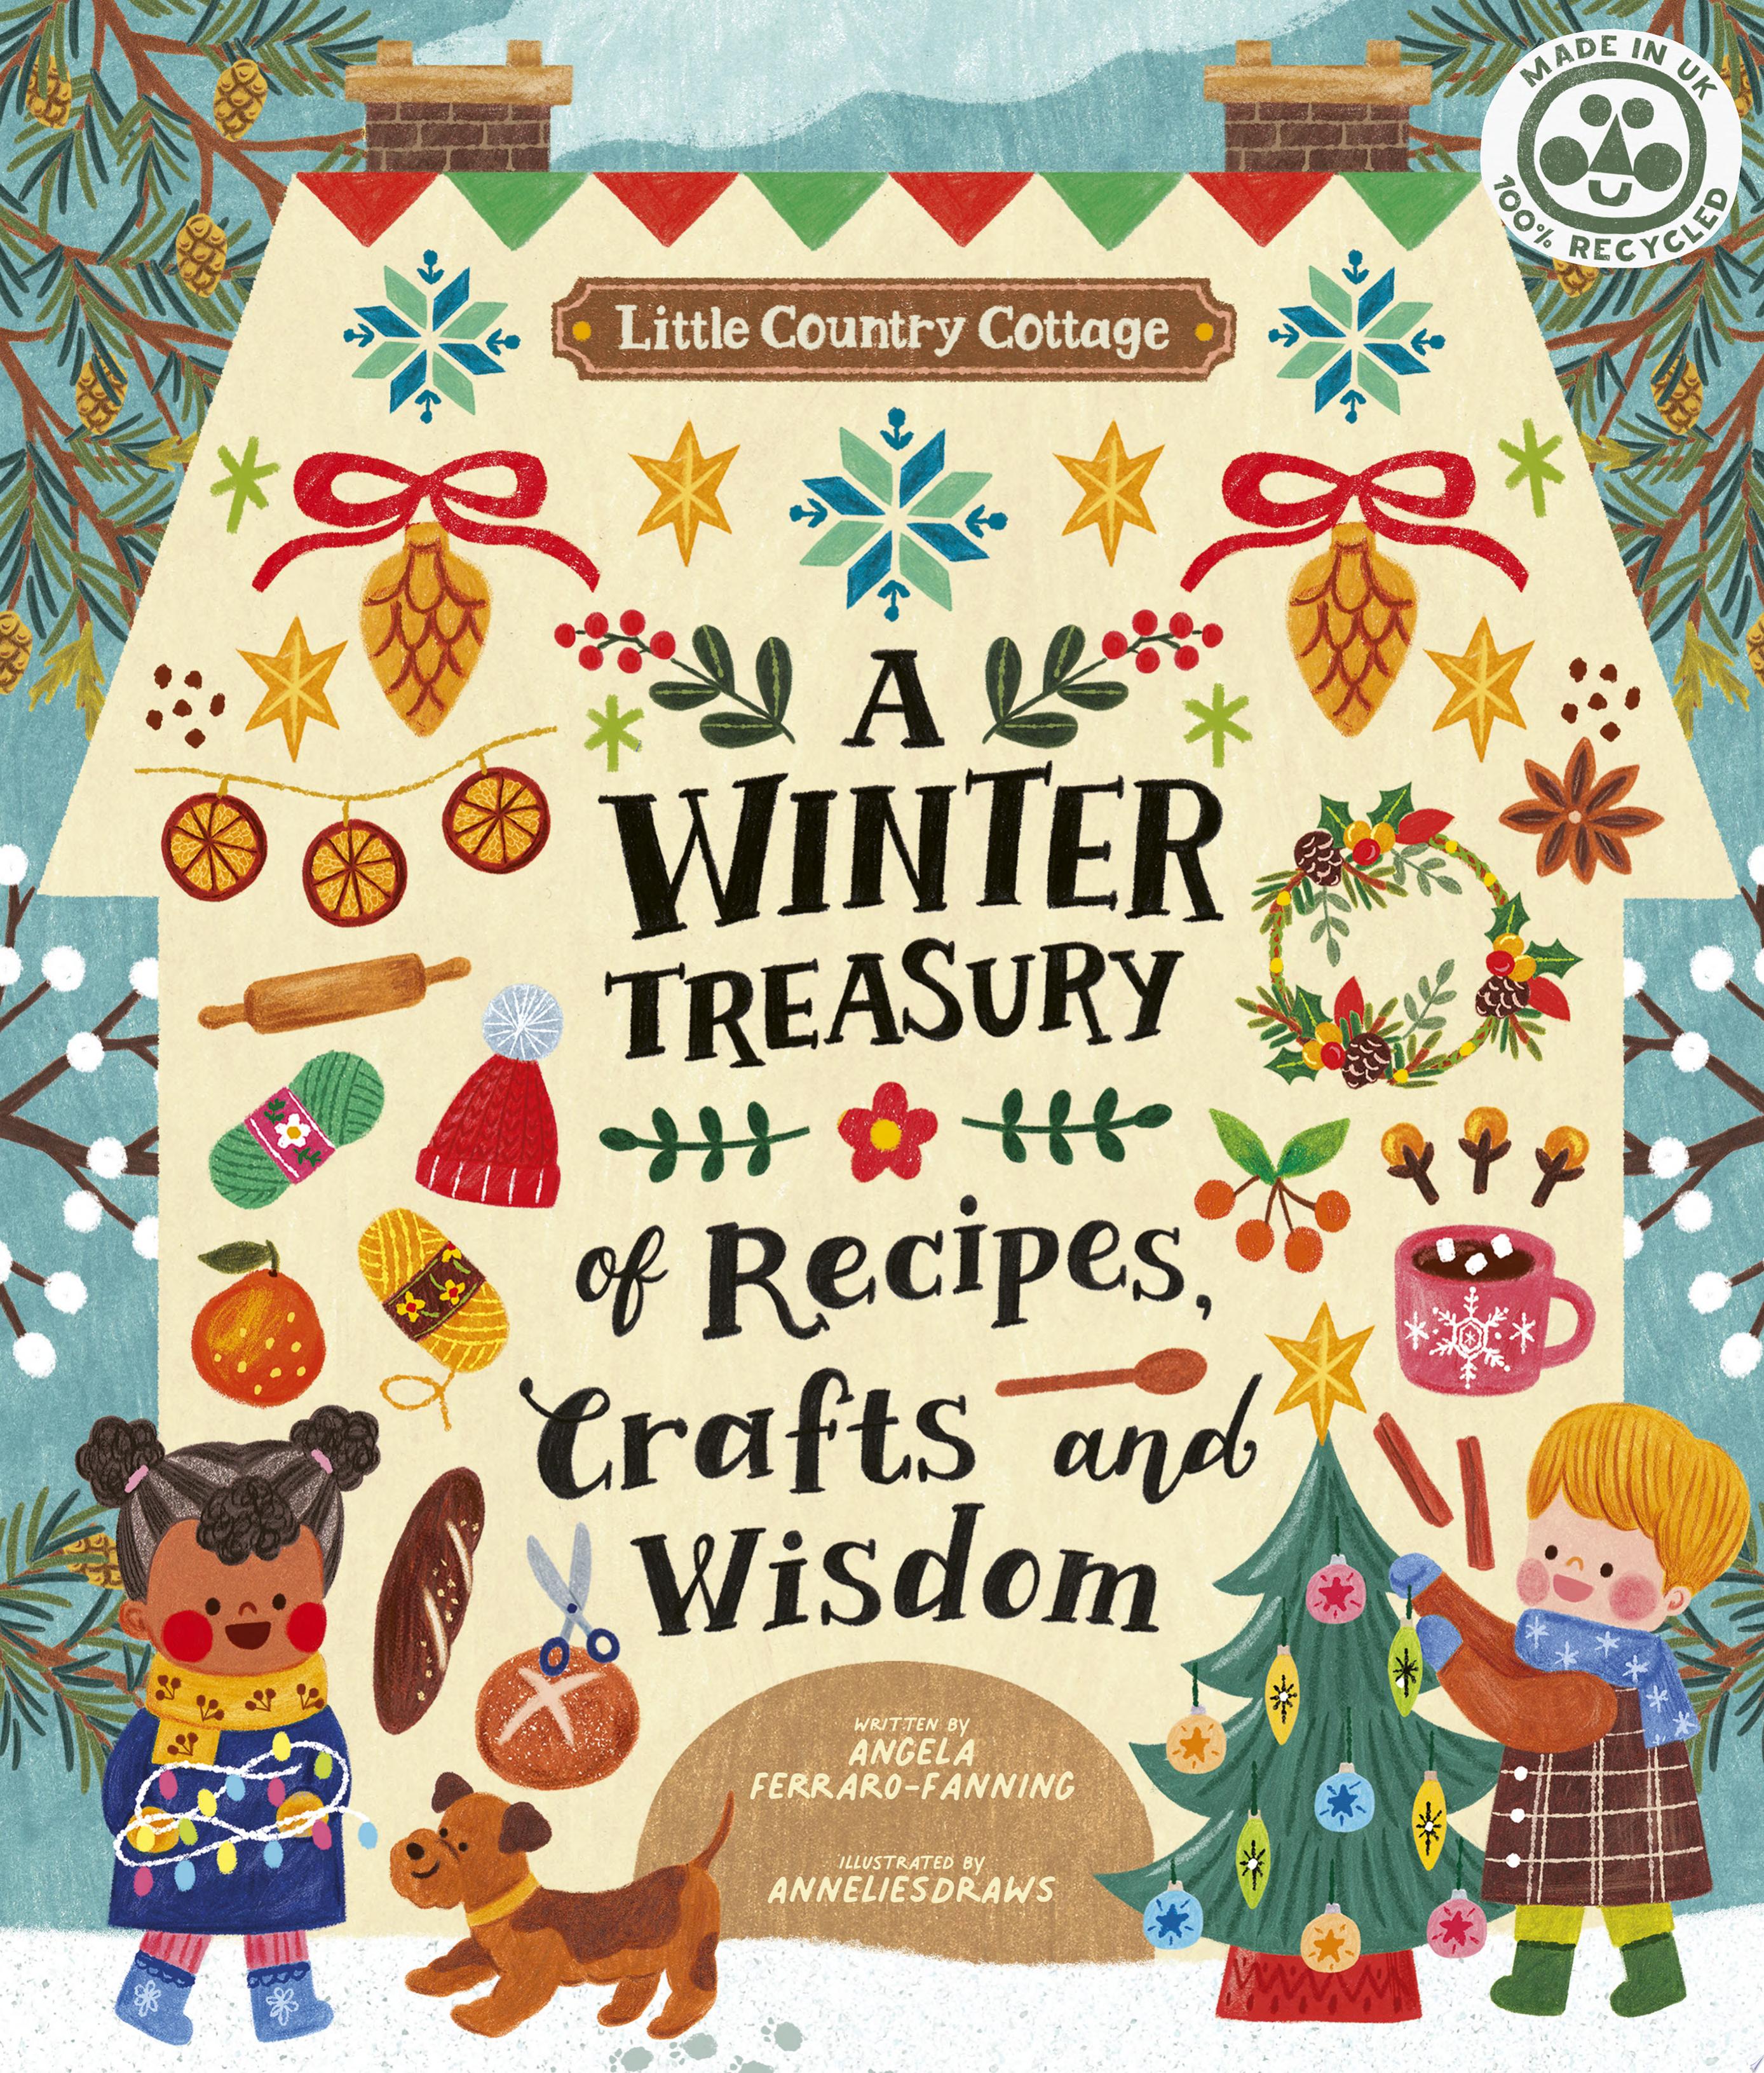 Image for "Little Country Cottage: A Winter Treasury of Recipes, Crafts and Wisdom"